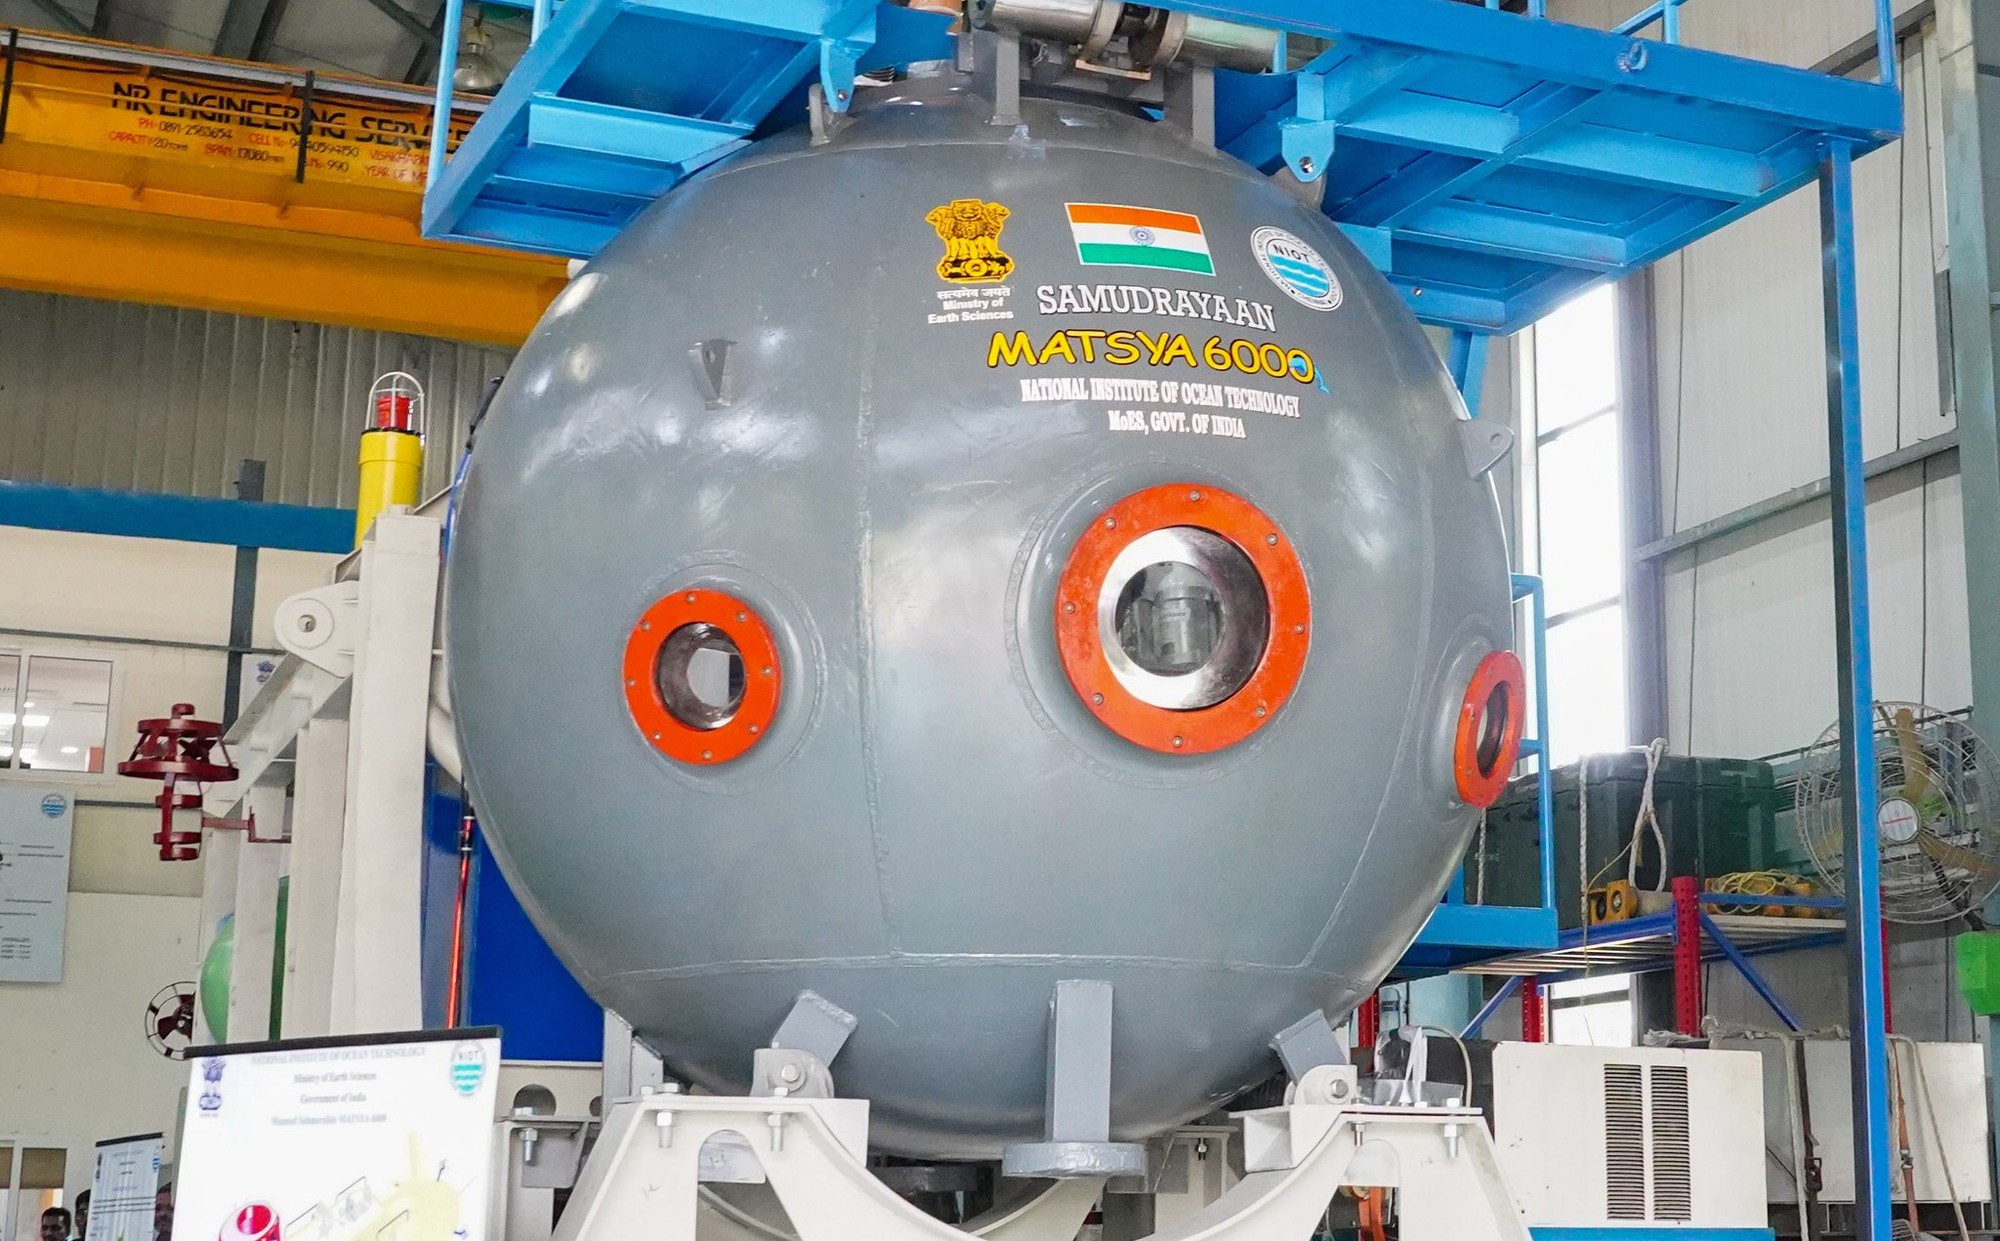 After space exploration, India wants to do deep sea research - Photo 1.